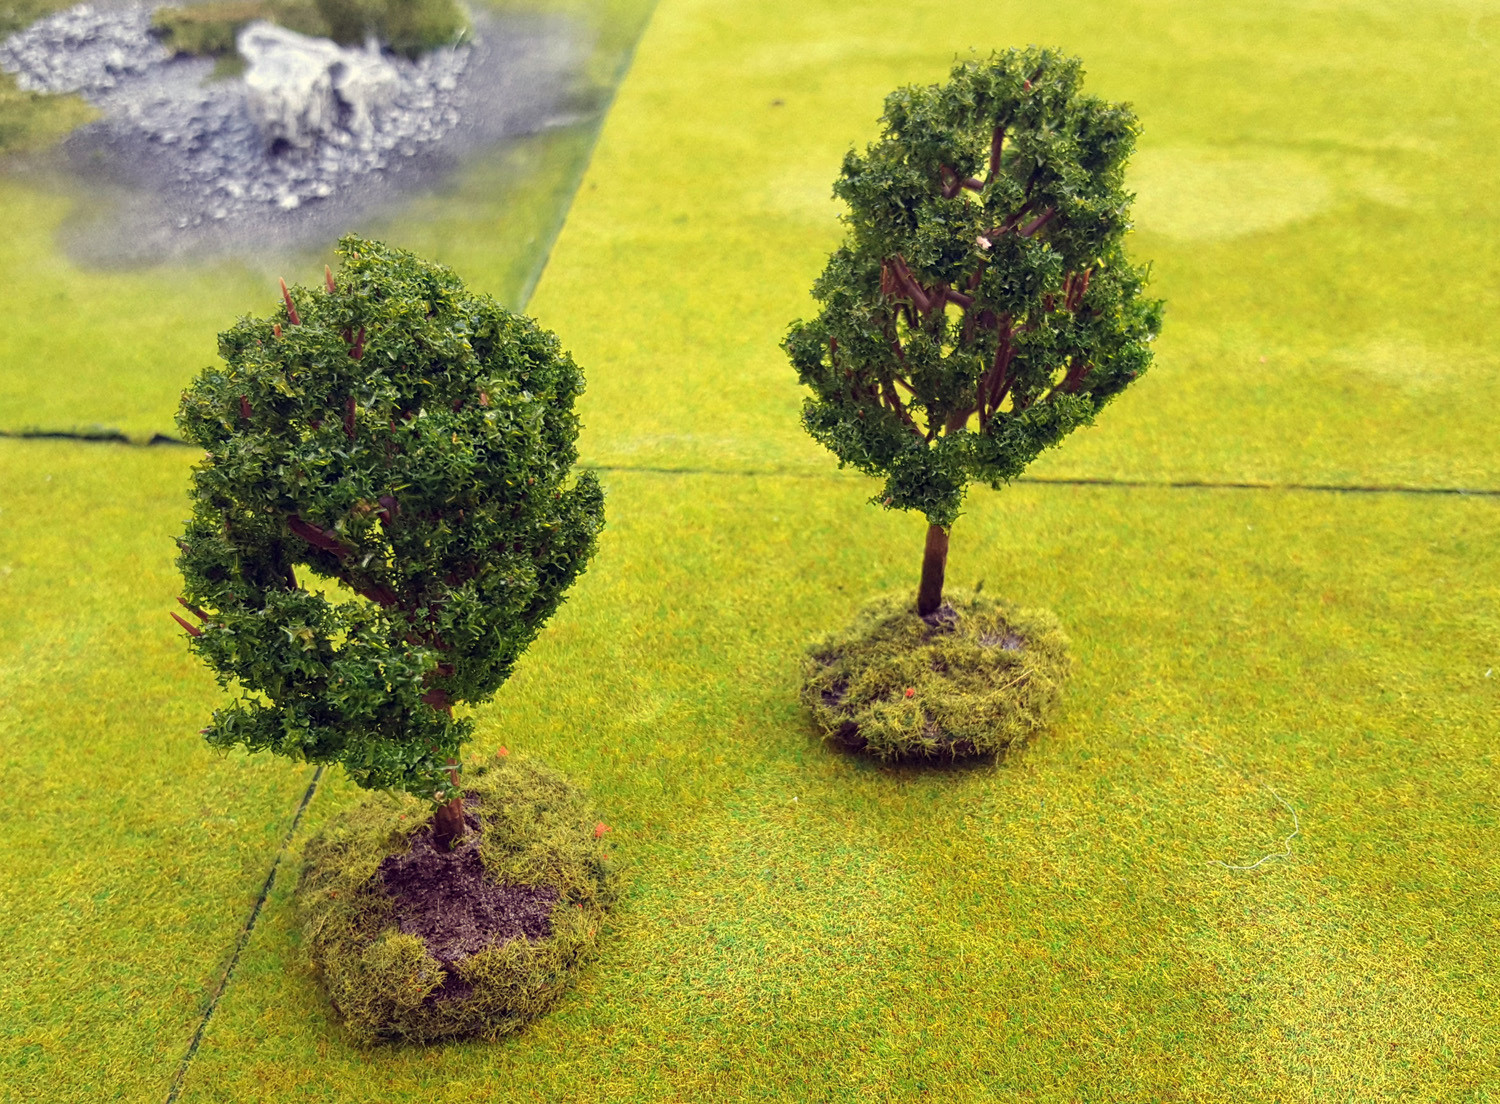 Trees used on a 6x4 board - rest of the terrain and miniatures shown for scale and display purposes only